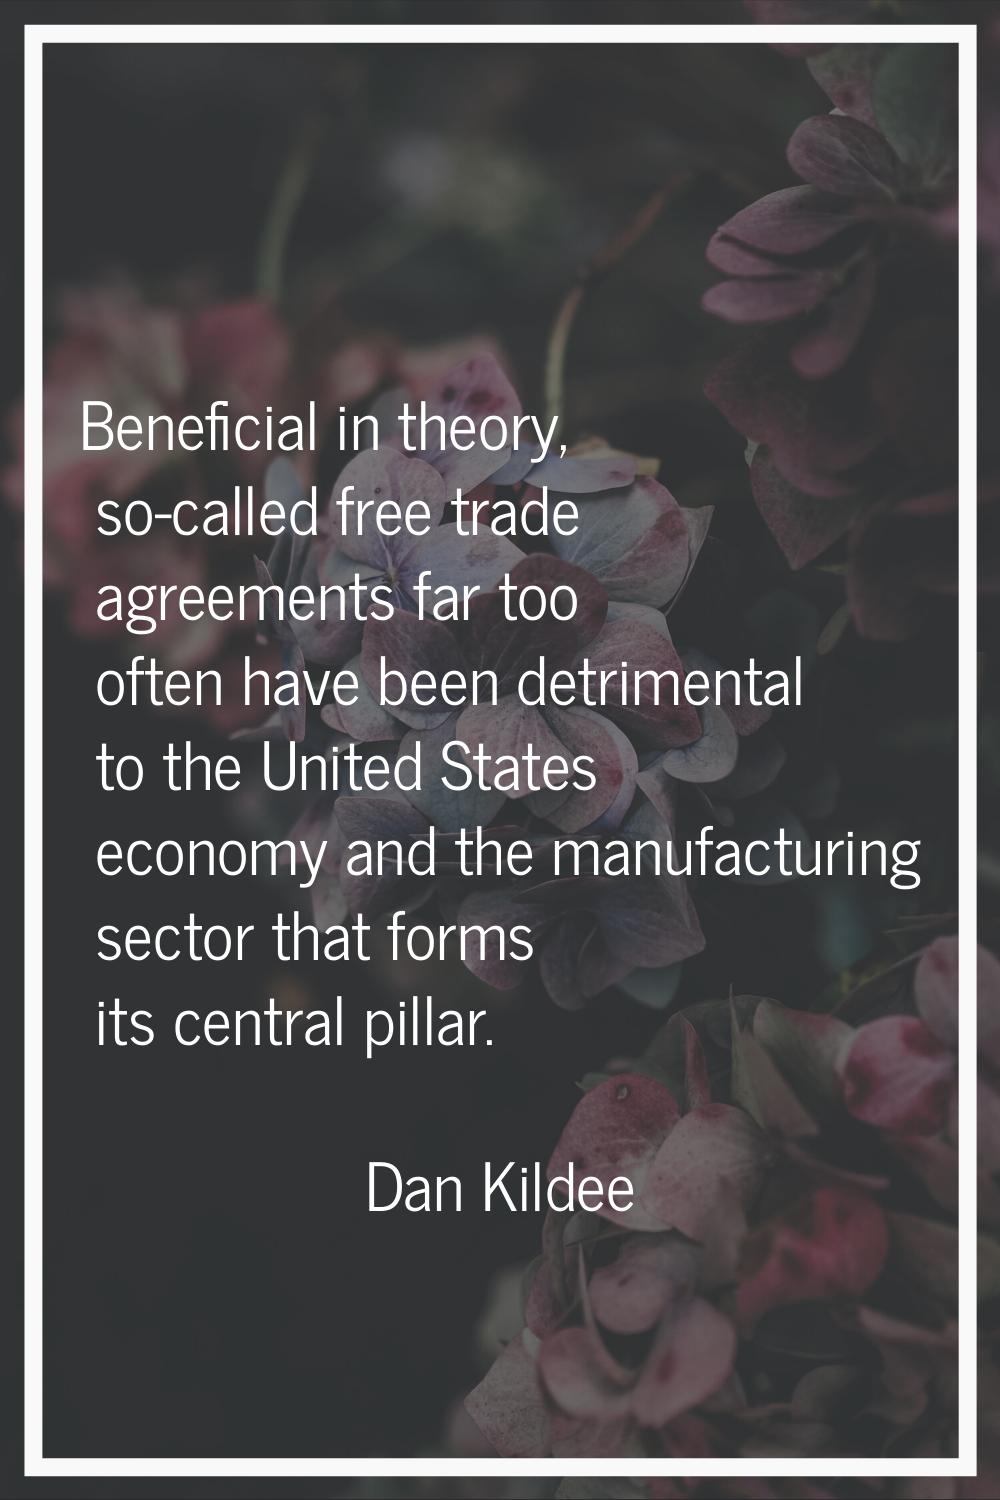 Beneficial in theory, so-called free trade agreements far too often have been detrimental to the Un